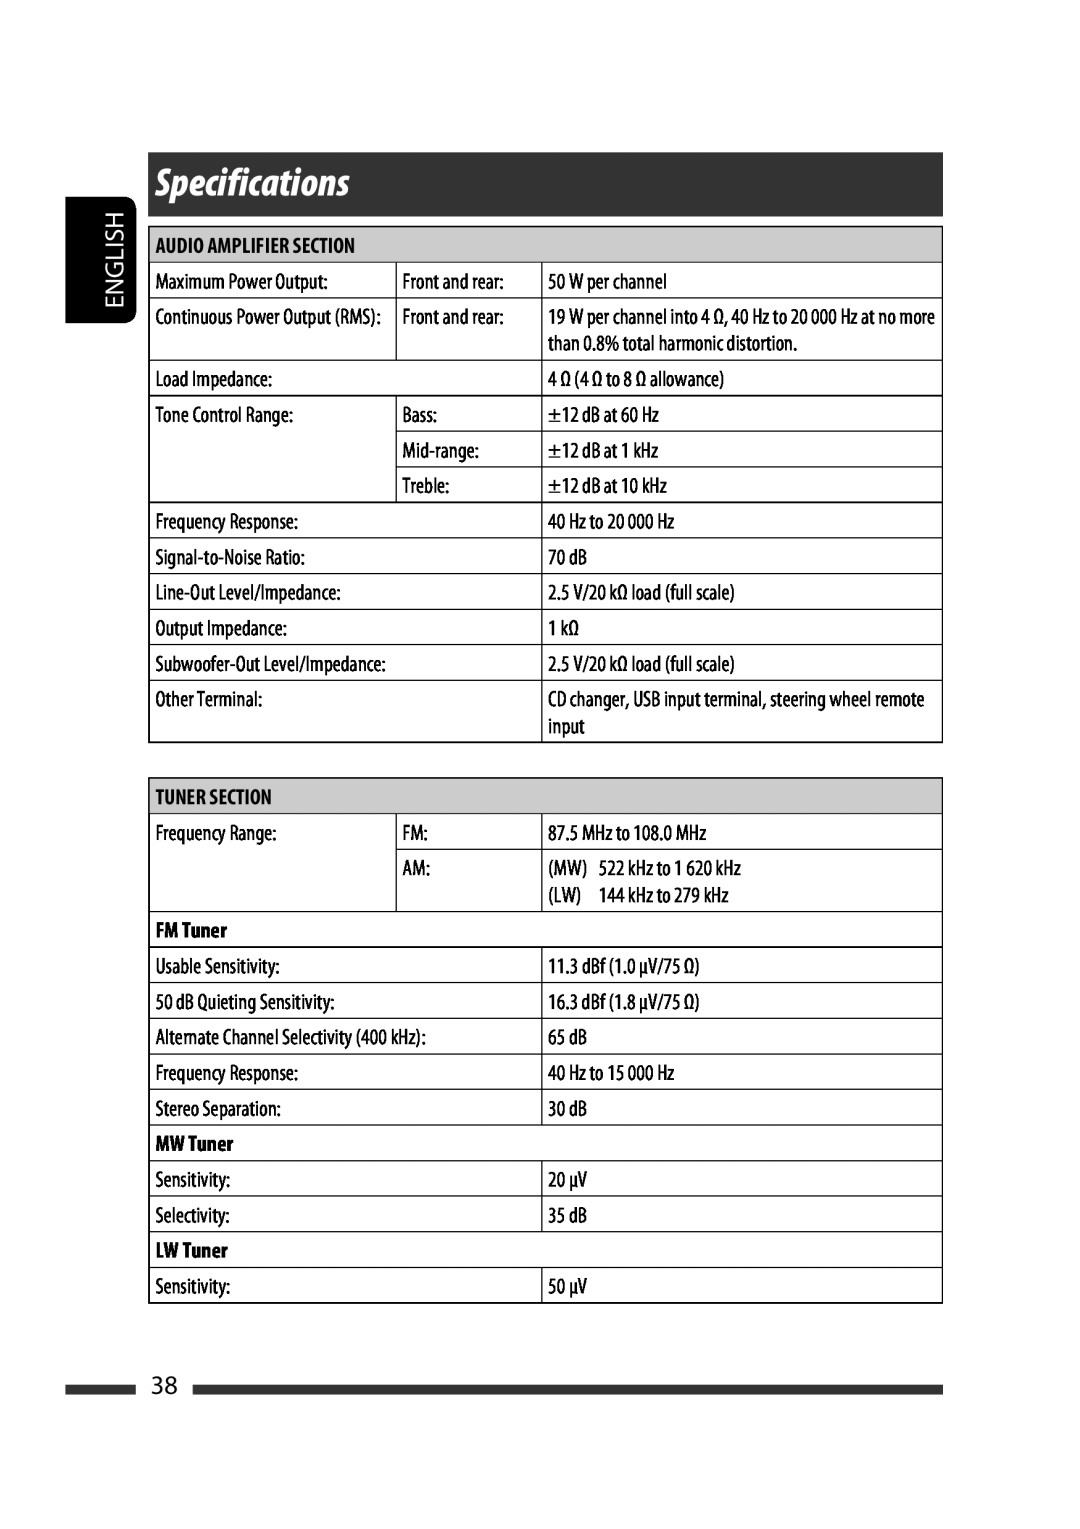 JVC KD-G731 manual Specifications, Audio Amplifier Section, Tuner Section, FM Tuner, MW Tuner, LW Tuner, English 